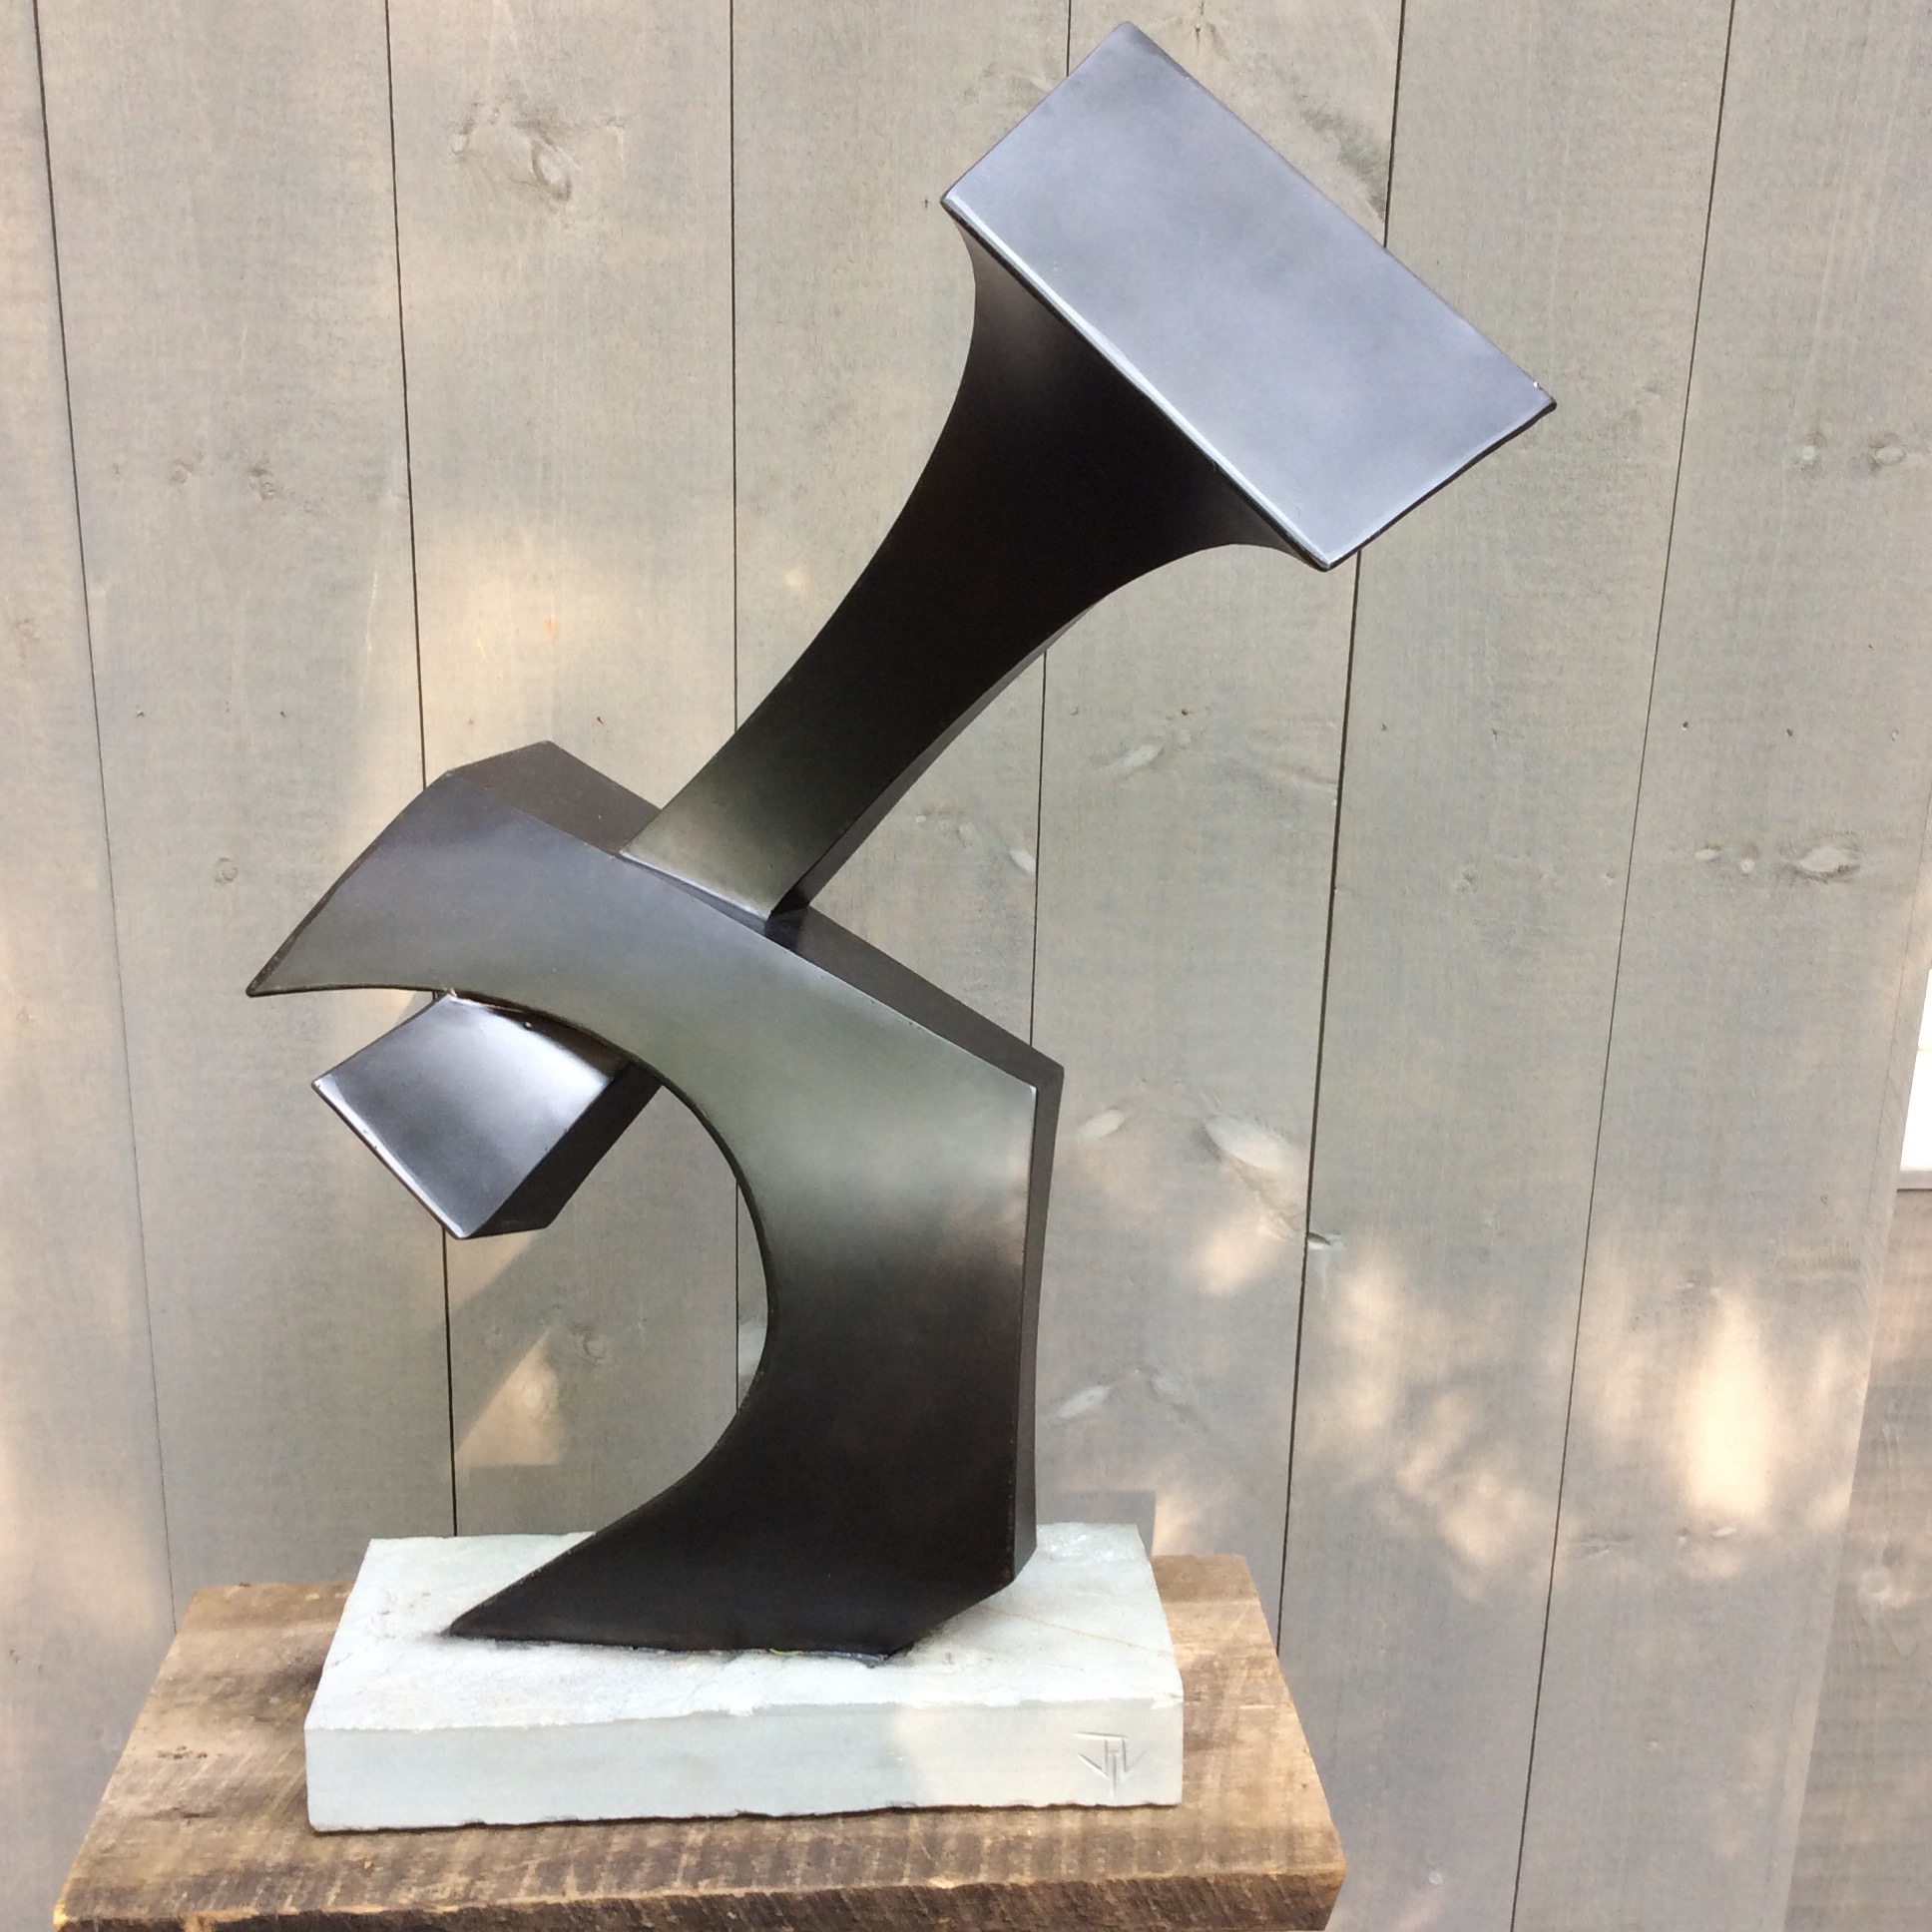  "Boxer"&nbsp; Blackened steel with stone base, $3200   